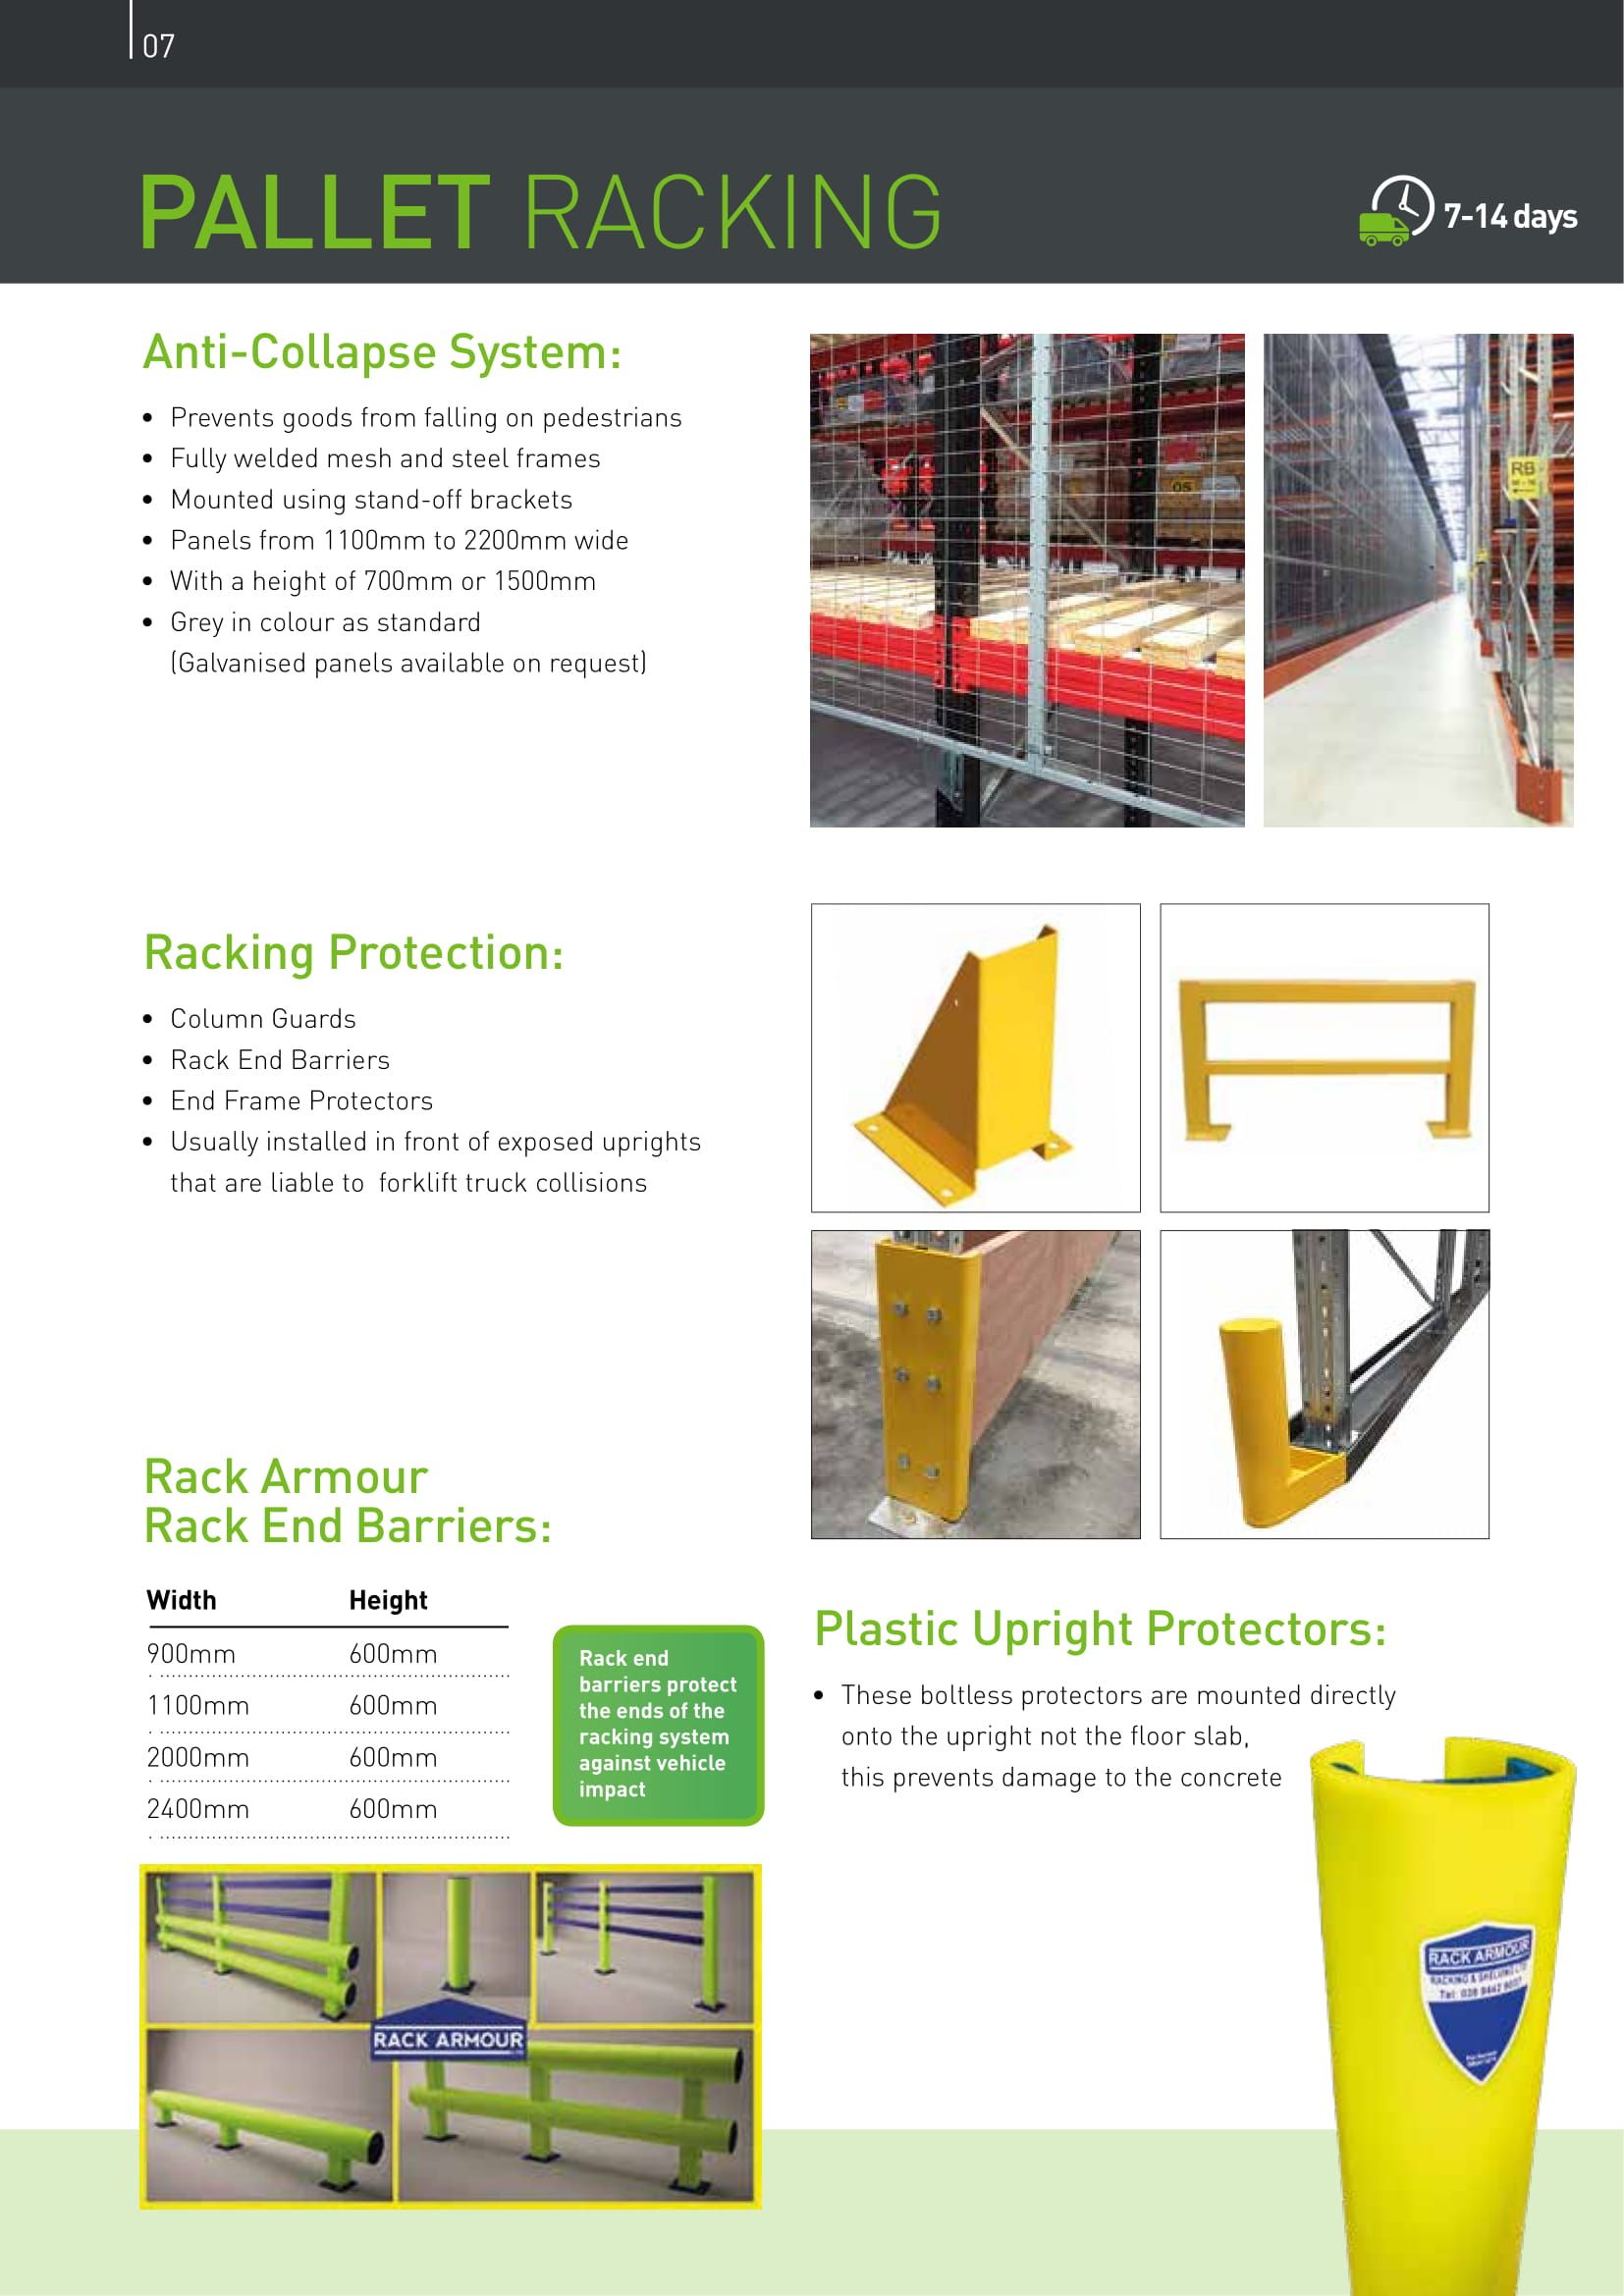 Pallet racking brochure page featuring anti-collapse systems, racking protection and rack armour.